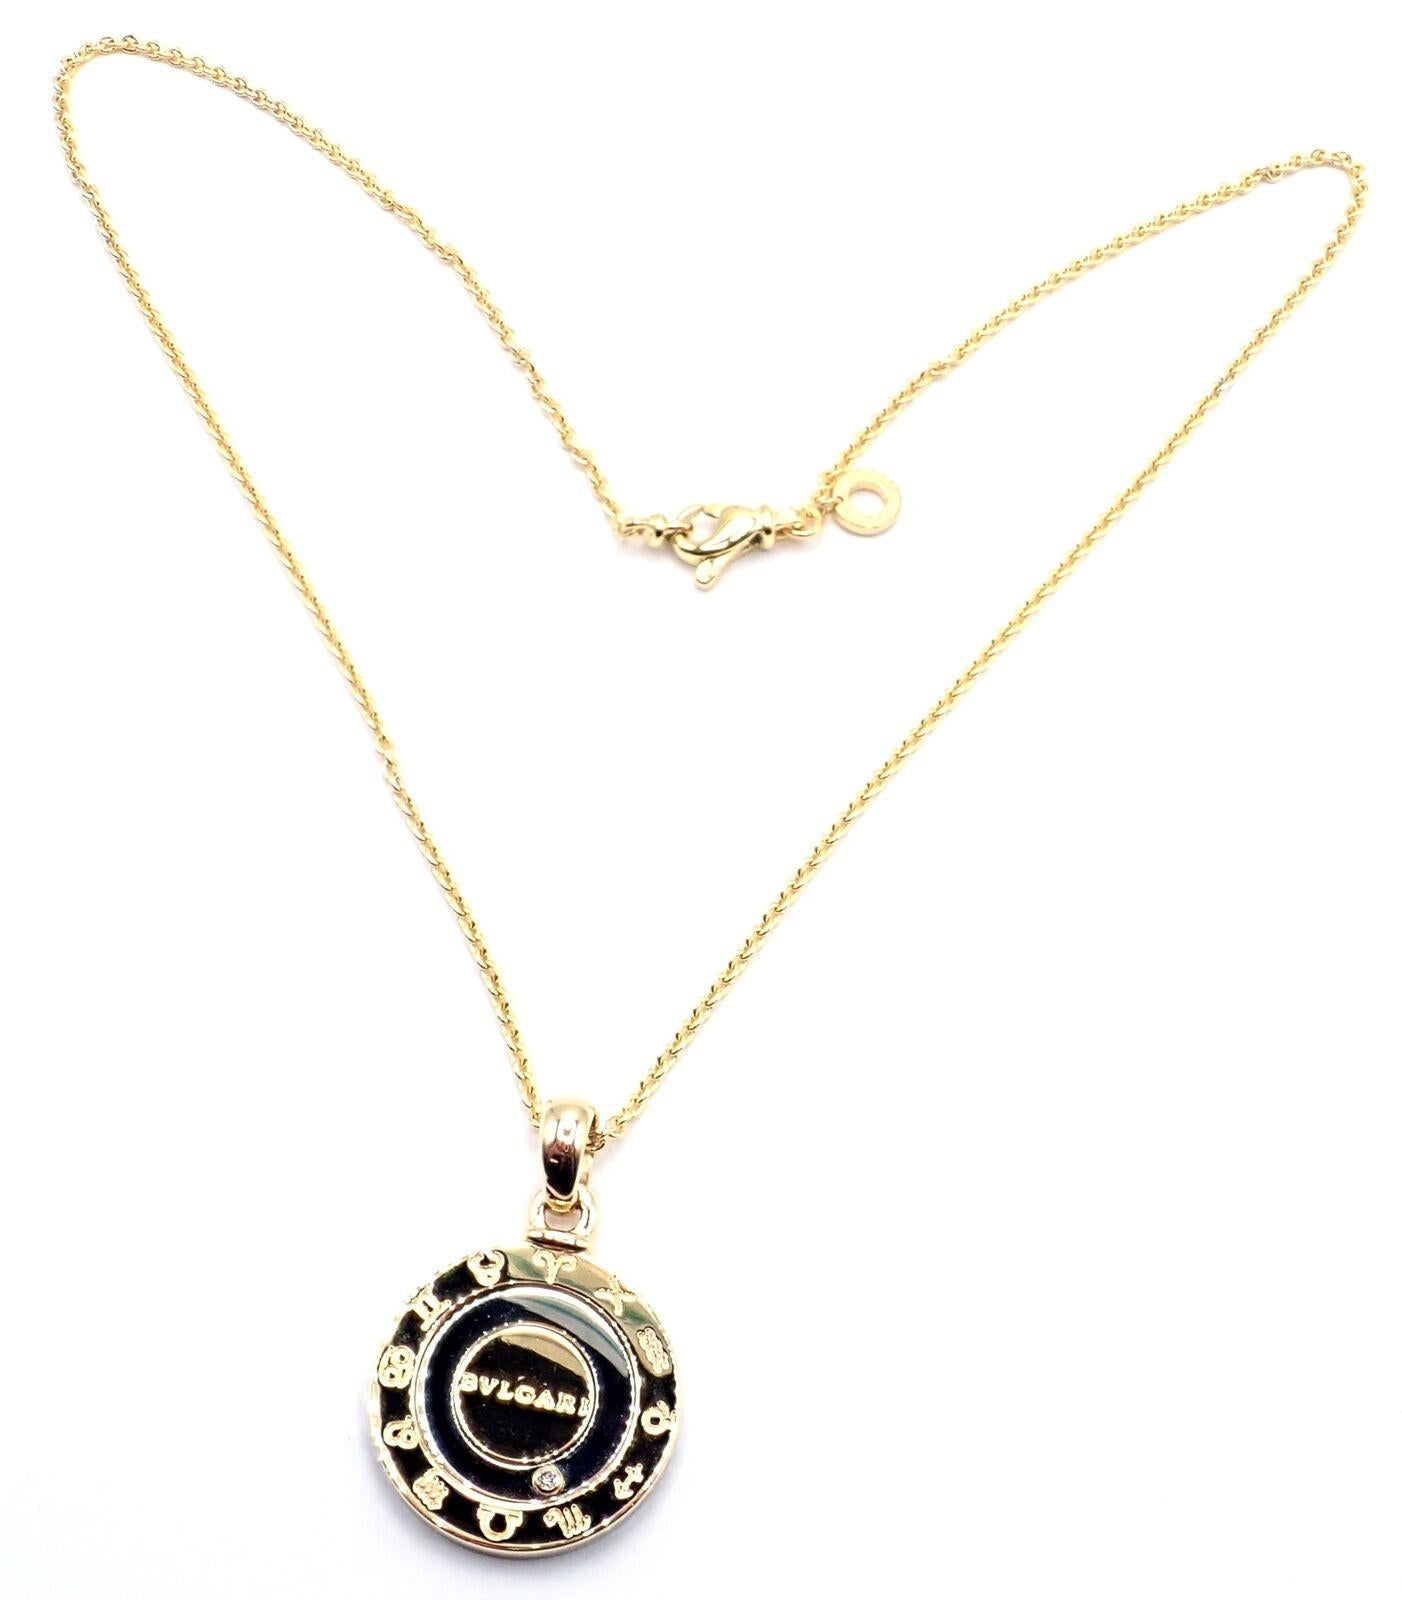 18k yellow gold and stainless steel vintage diamond Horoscope Zodiac pendant necklace by Bulgari.
With 1 round brilliant cut diamond VS1 clarity, G color total weight .01ct
Details:
Length Chain: 16